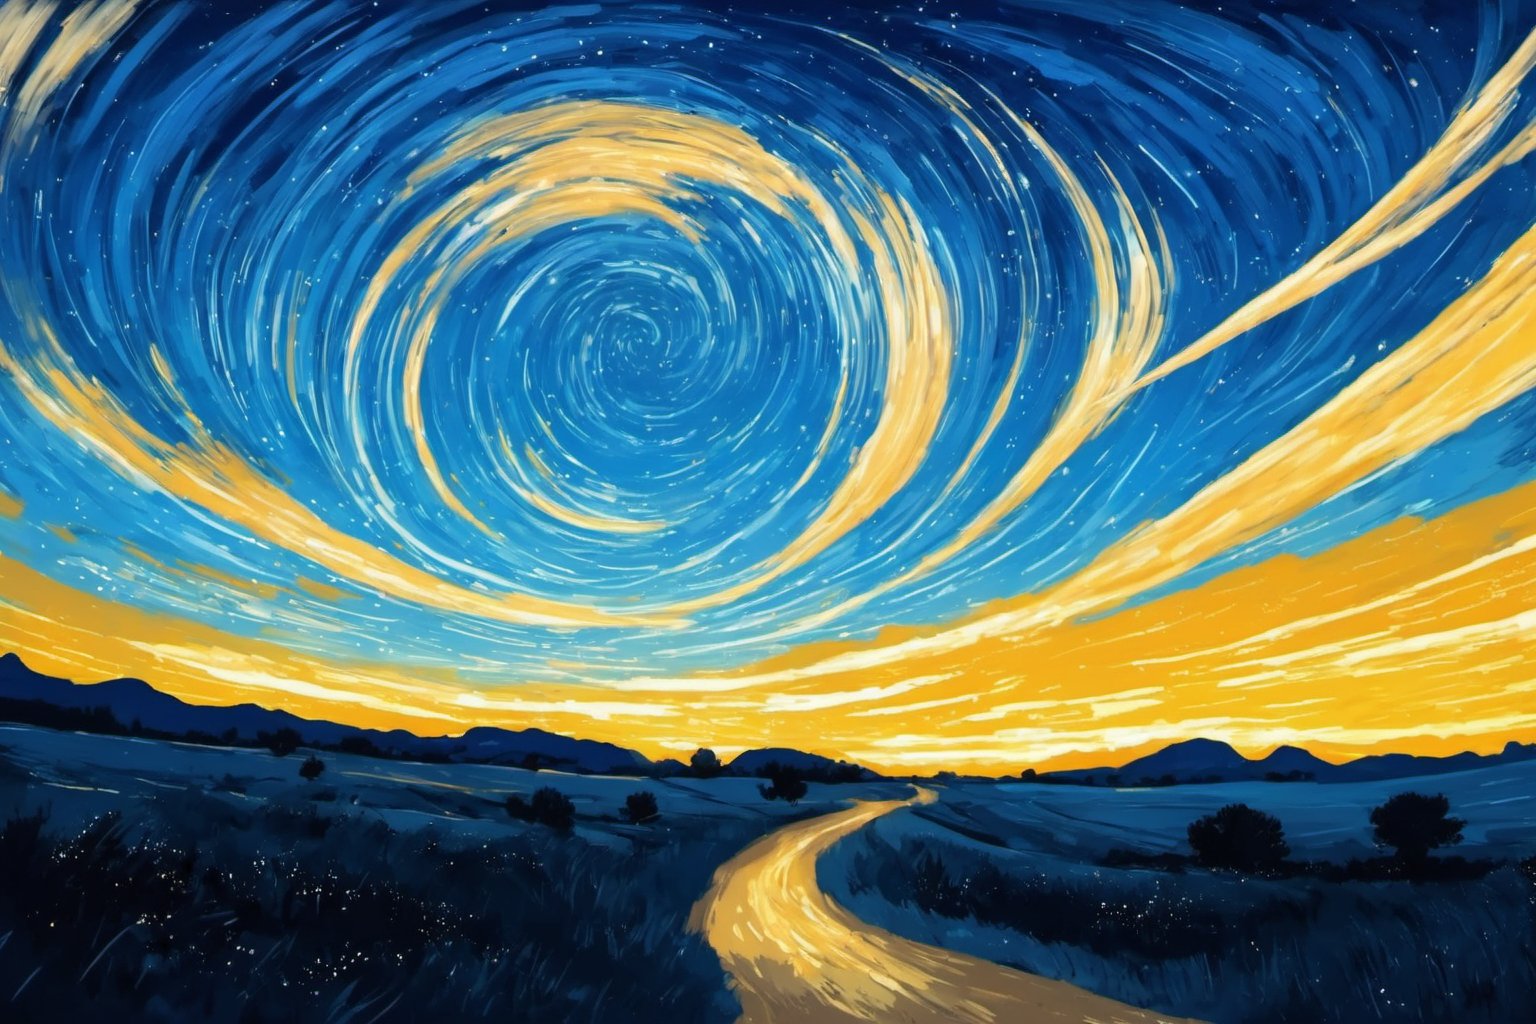 an illustration portraying a sky filled with beautiful meteorites, their radiant trails illuminating the night sky.
Artist Inspiration: Vincent van Gogh
Description: Drawing from van Gogh's expressive style, the illustration captures the meteorites as dynamic elements in the sky. Their vibrant trails dance across the canvas, adding movement and energy. The atmosphere is a blend of artistic interpretation and the fascination of cosmic phenomena. --v 5 --stylize 1000, cinematics, 4k, cinematics, best lighting, best perspective, best composition, ,no_humans,EpicSky,LODBG,lty,cloud